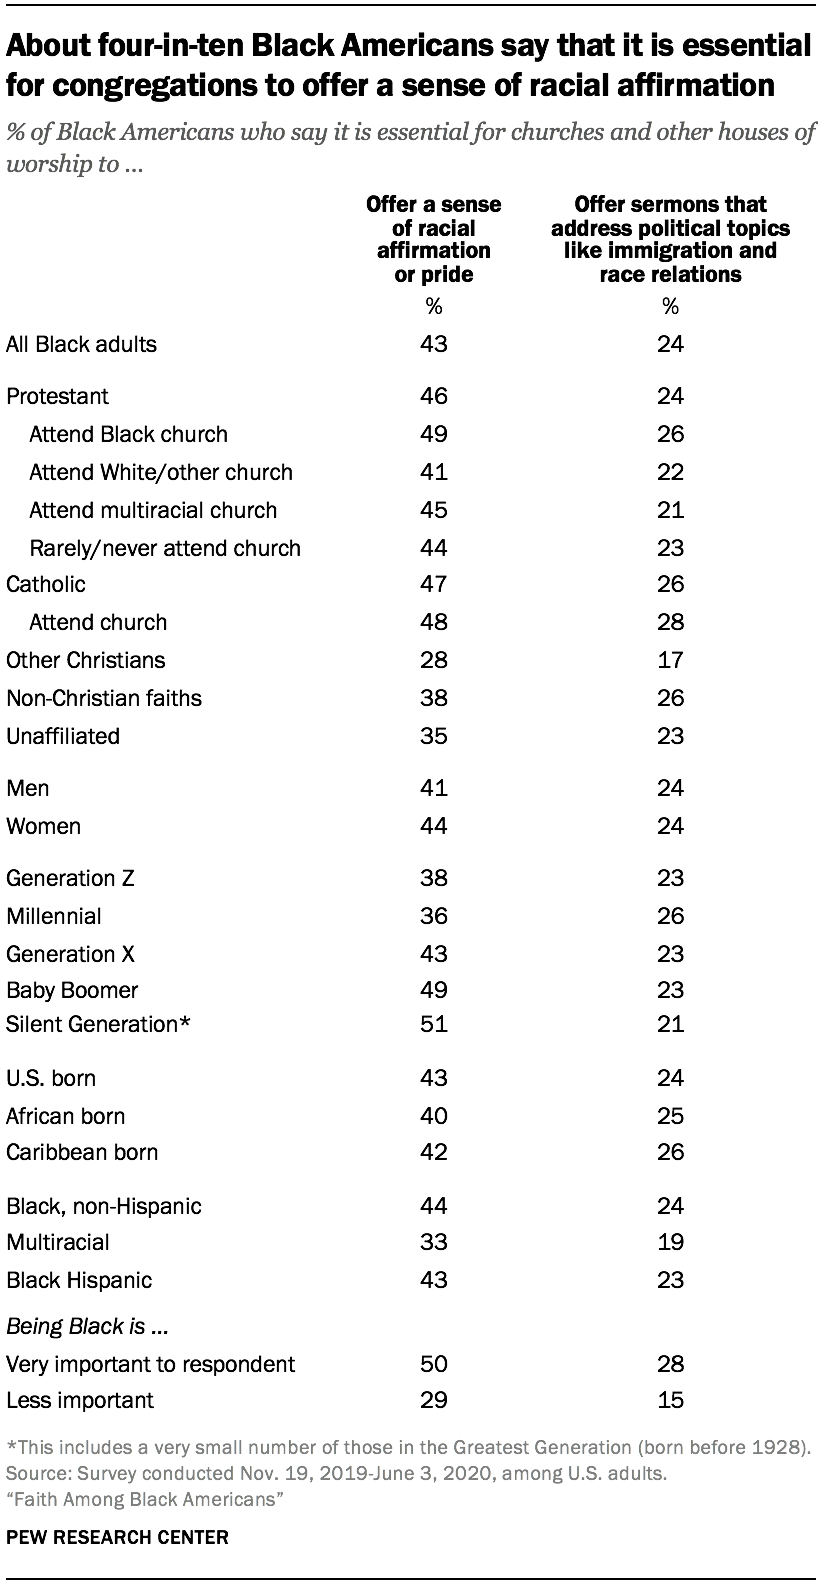 About four-in-ten Black Americans say that it is essential for congregations to offer a sense of racial affirmation